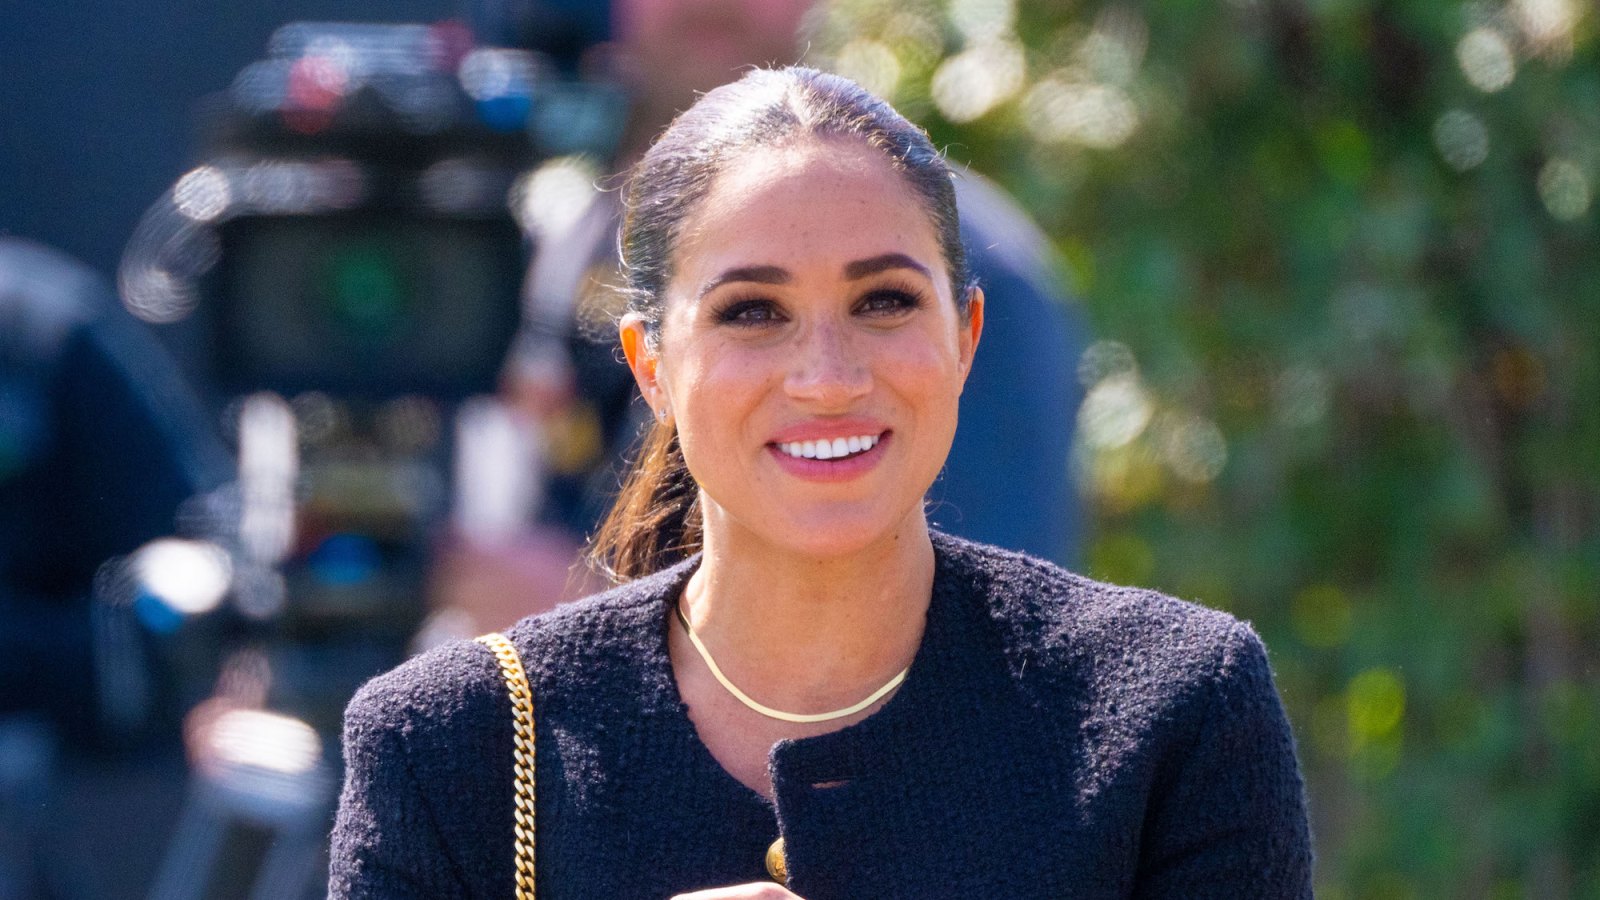 Meghan Markle Is Seemingly Looking to Relaunch The Tig Blog After Shutting It Down in 2017 Amid Prince Harry Romance